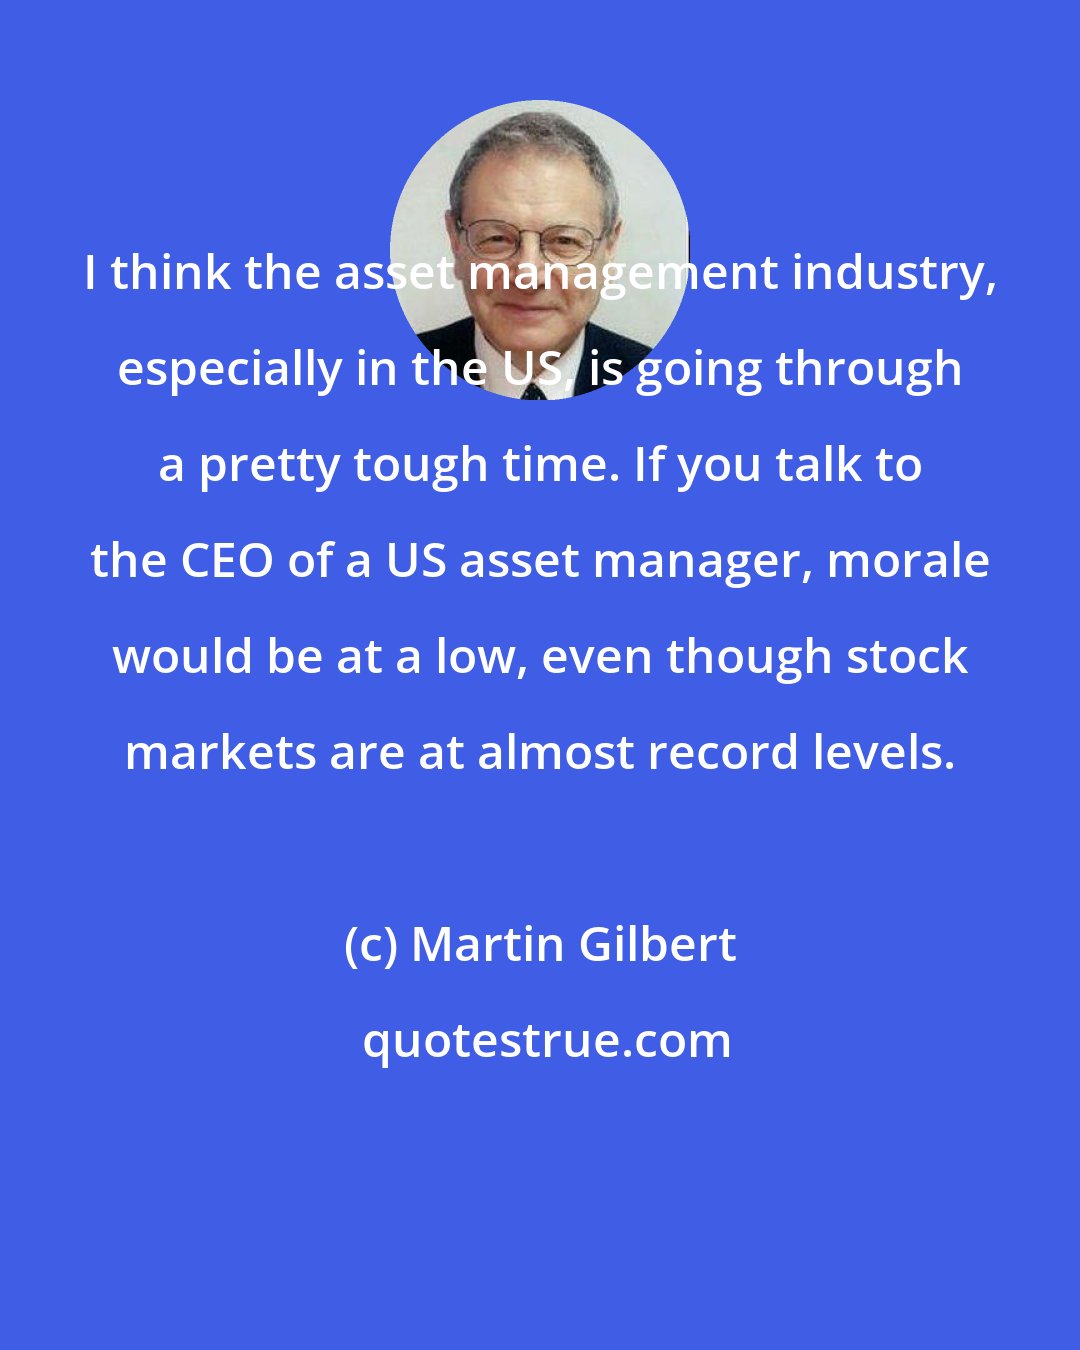 Martin Gilbert: I think the asset management industry, especially in the US, is going through a pretty tough time. If you talk to the CEO of a US asset manager, morale would be at a low, even though stock markets are at almost record levels.